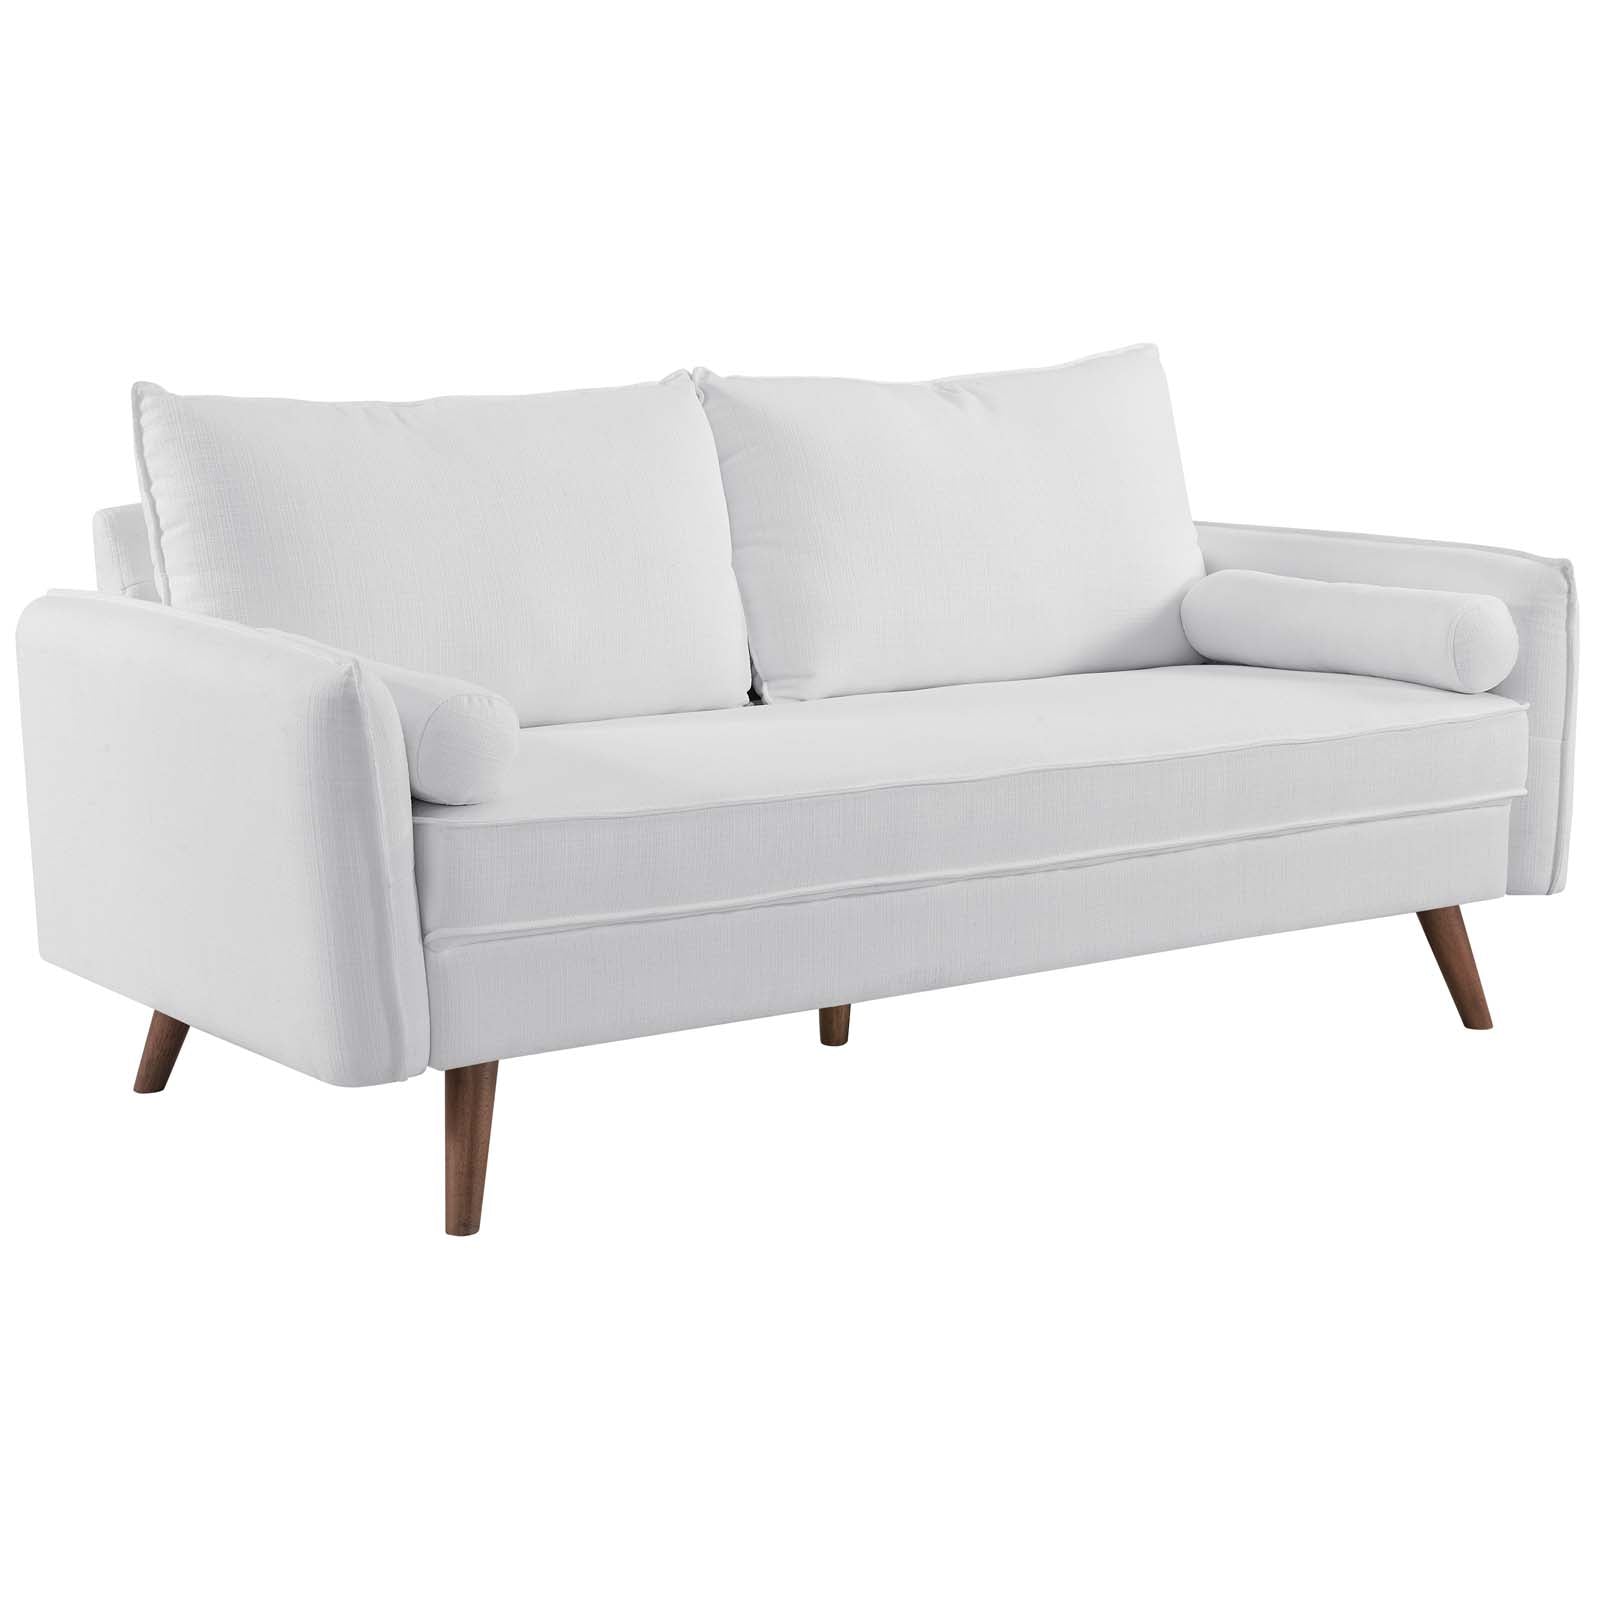 Modway Sofas & Couches - Revive-Upholstered-Fabric-Sofa-and-Loveseat-Set-White